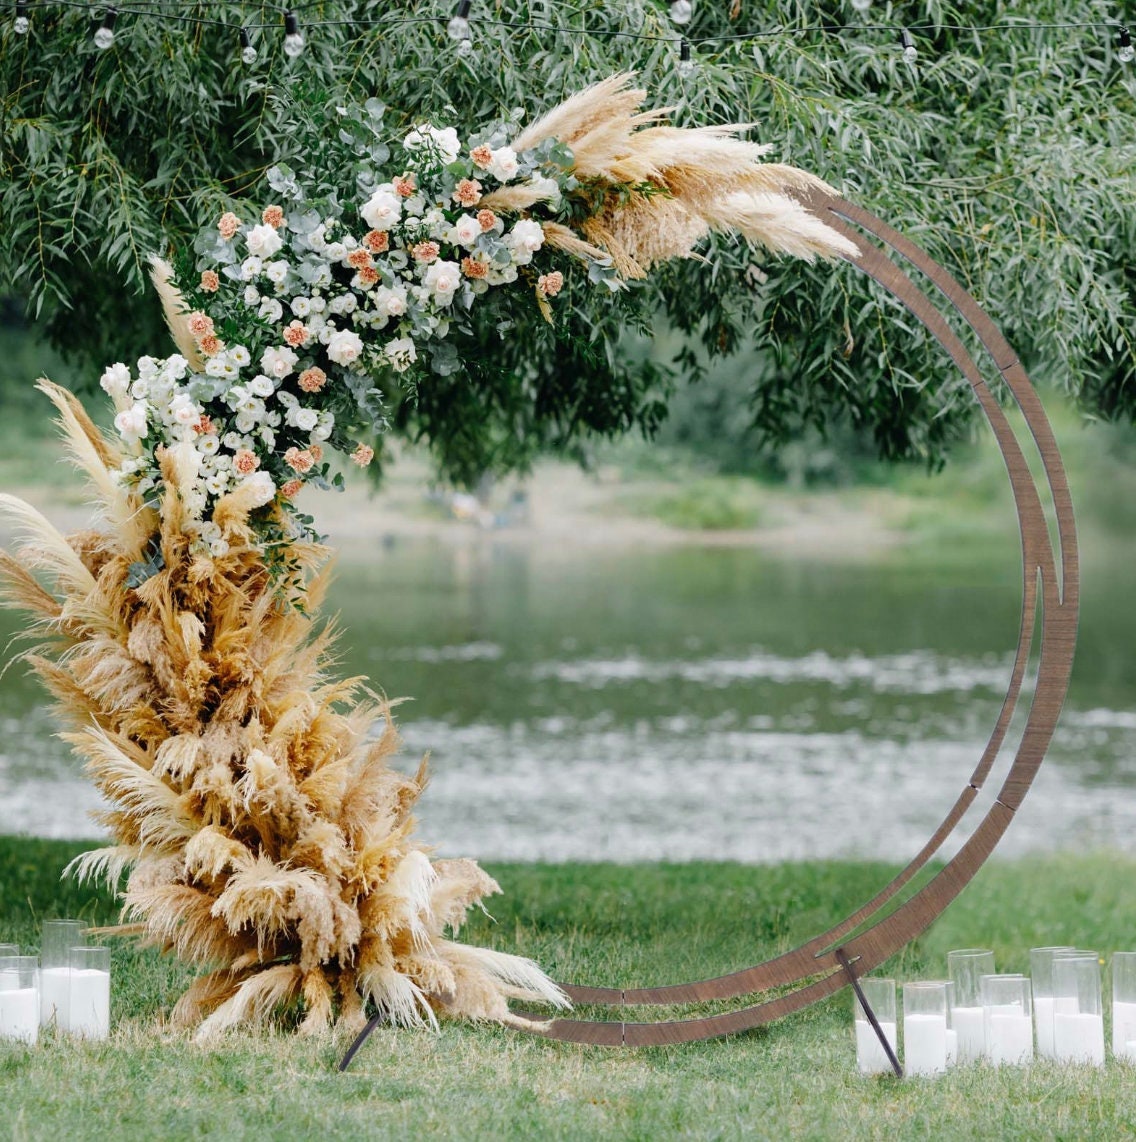 8 FT. Wood Round Wedding Arch Backdrop Brown DIY Stand Rustic Photo Backdrop Heavy Duty Photography Stand Ceremony Outdoor Decoration Floral